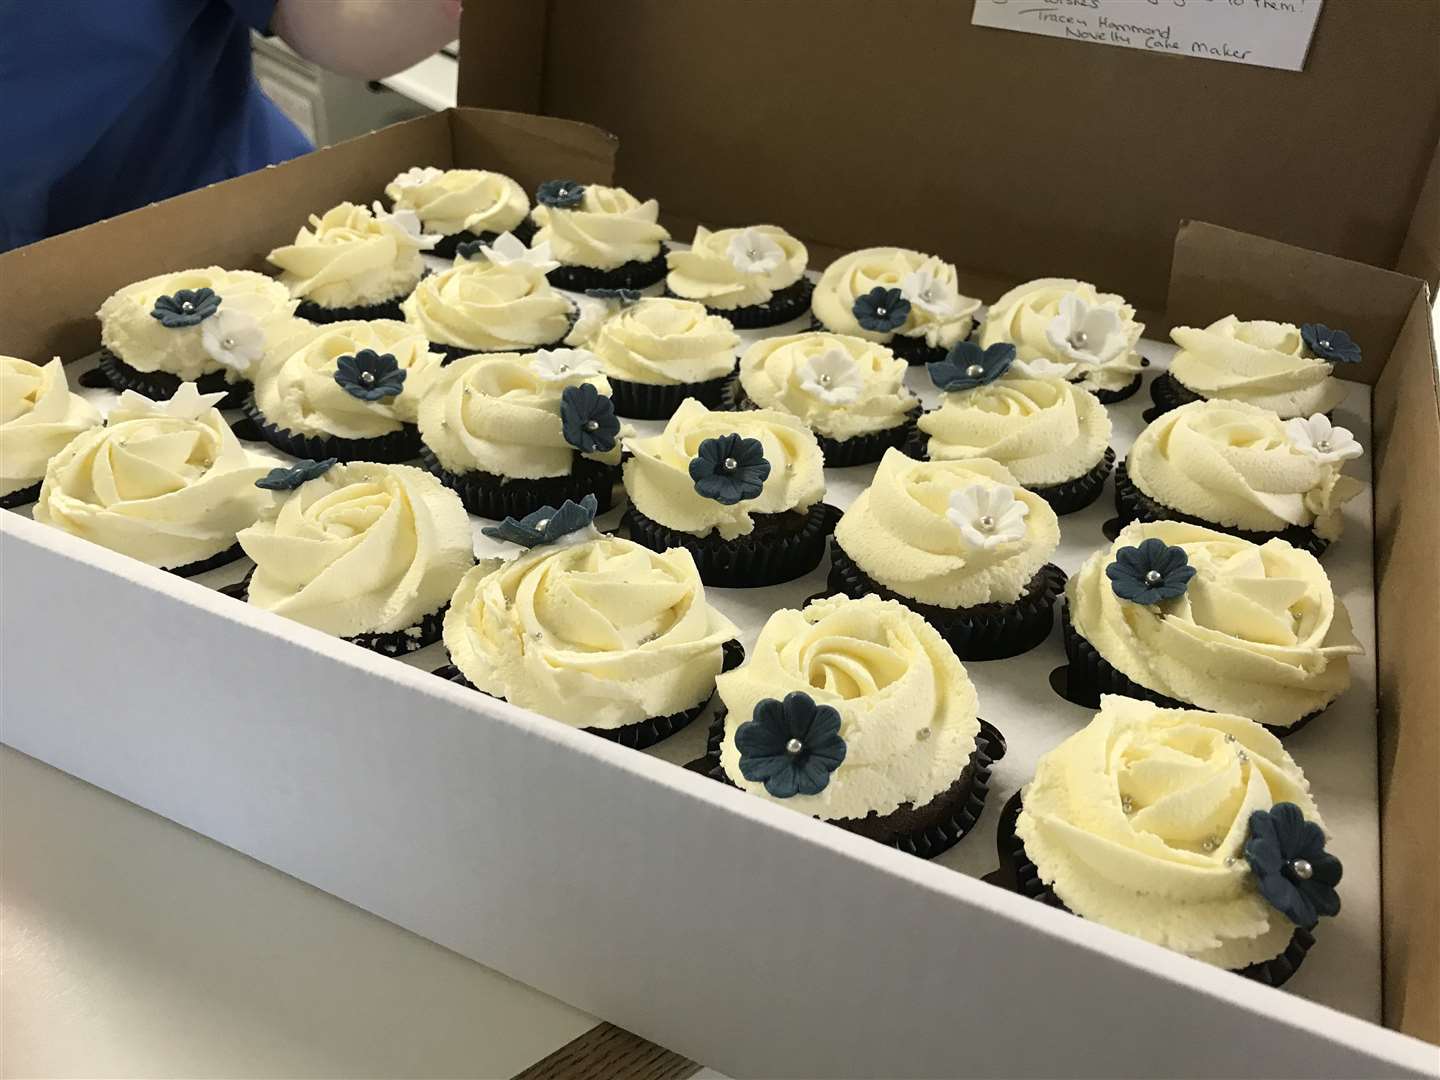 The chocolate cupcakes were given to staff at Sheppey Community Hospital after Lauren and Sam's wedding was cancelled because of coronavirus